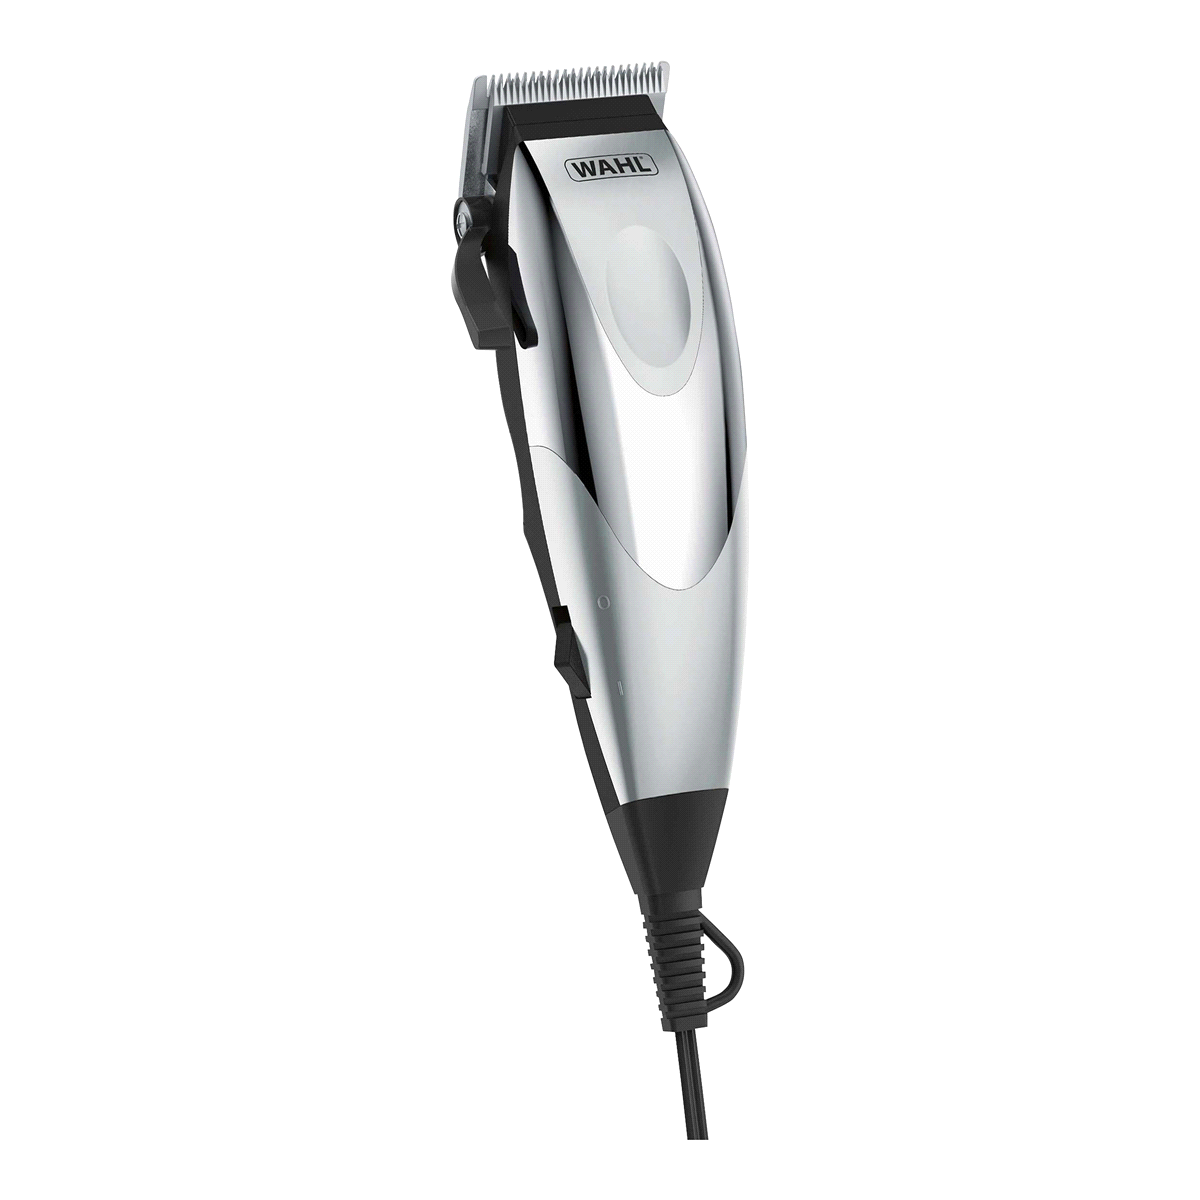 slide 5 of 5, Wahl Chrome Cut Complete Haircutting Kit - 9670-700, 1 ct